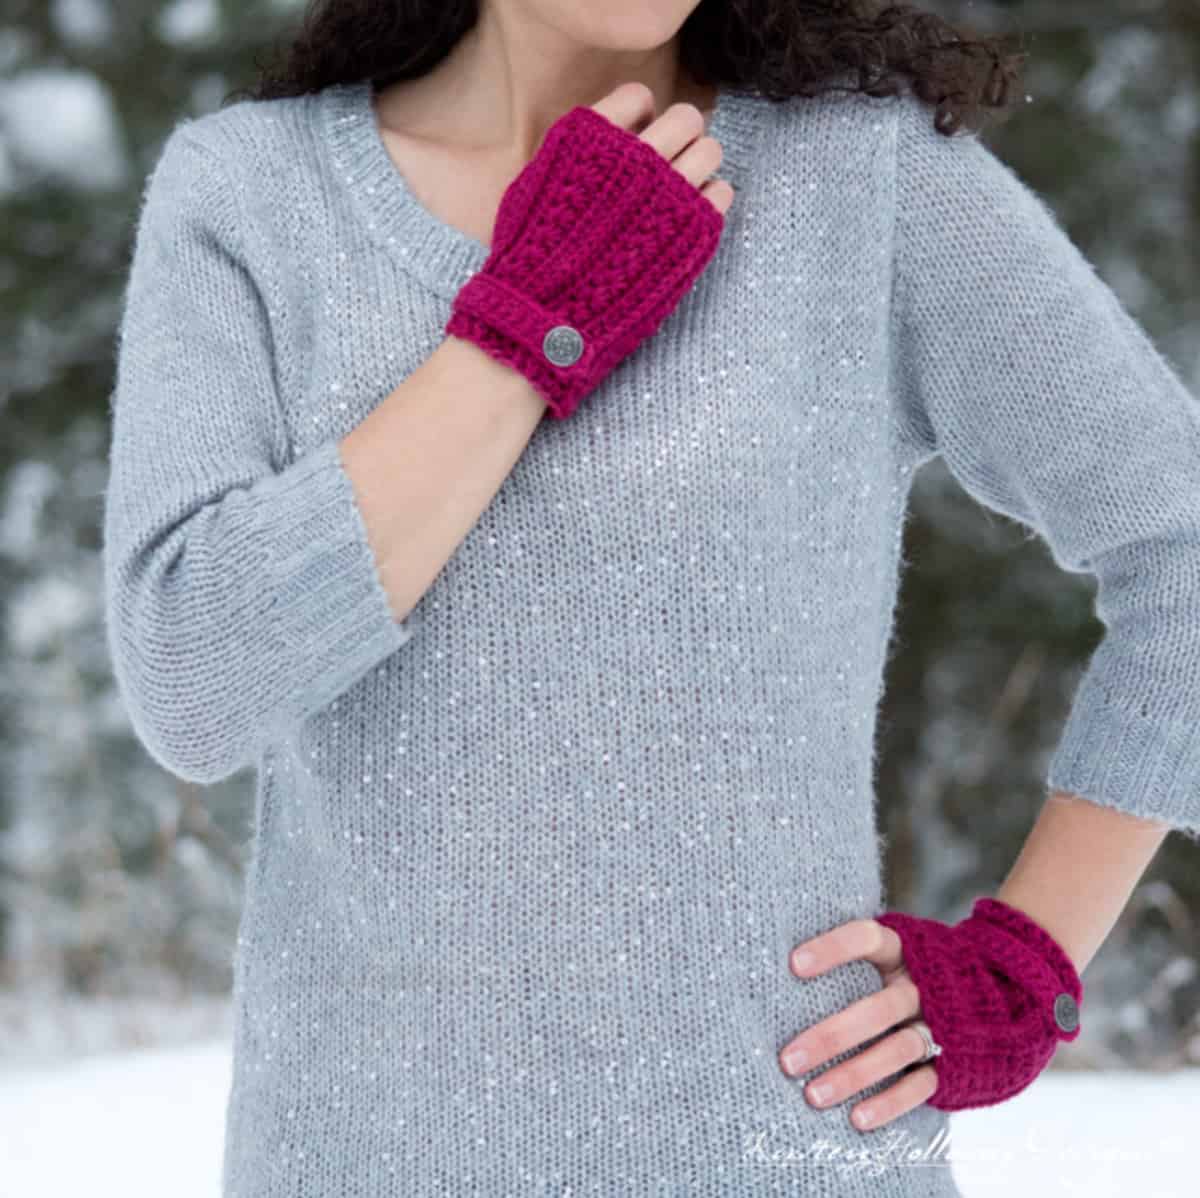 Woman in silver colored sweater wearing fuscia colored crochet fingerless mitts.